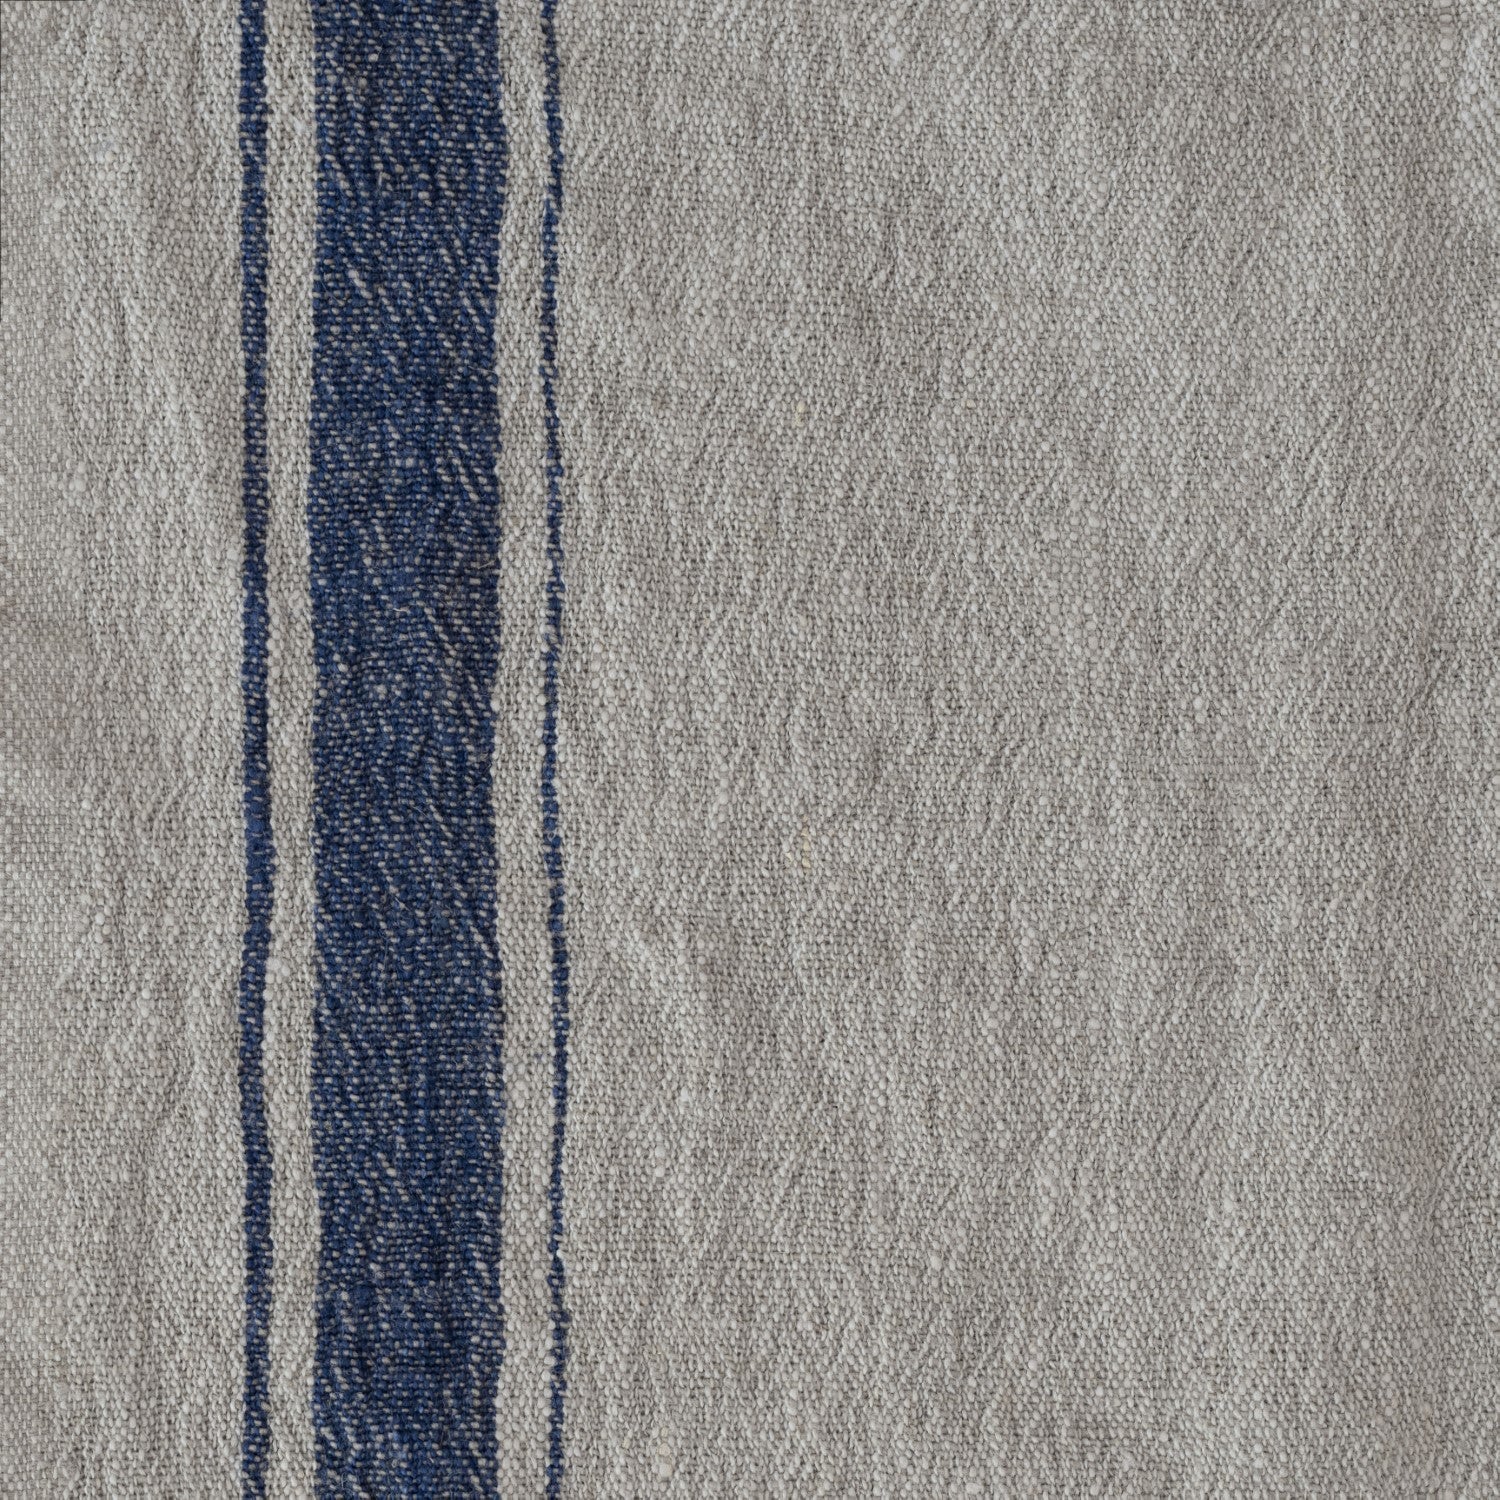 Striped Linen Fabric Natural Gray Blue White Stonewashed Vintage